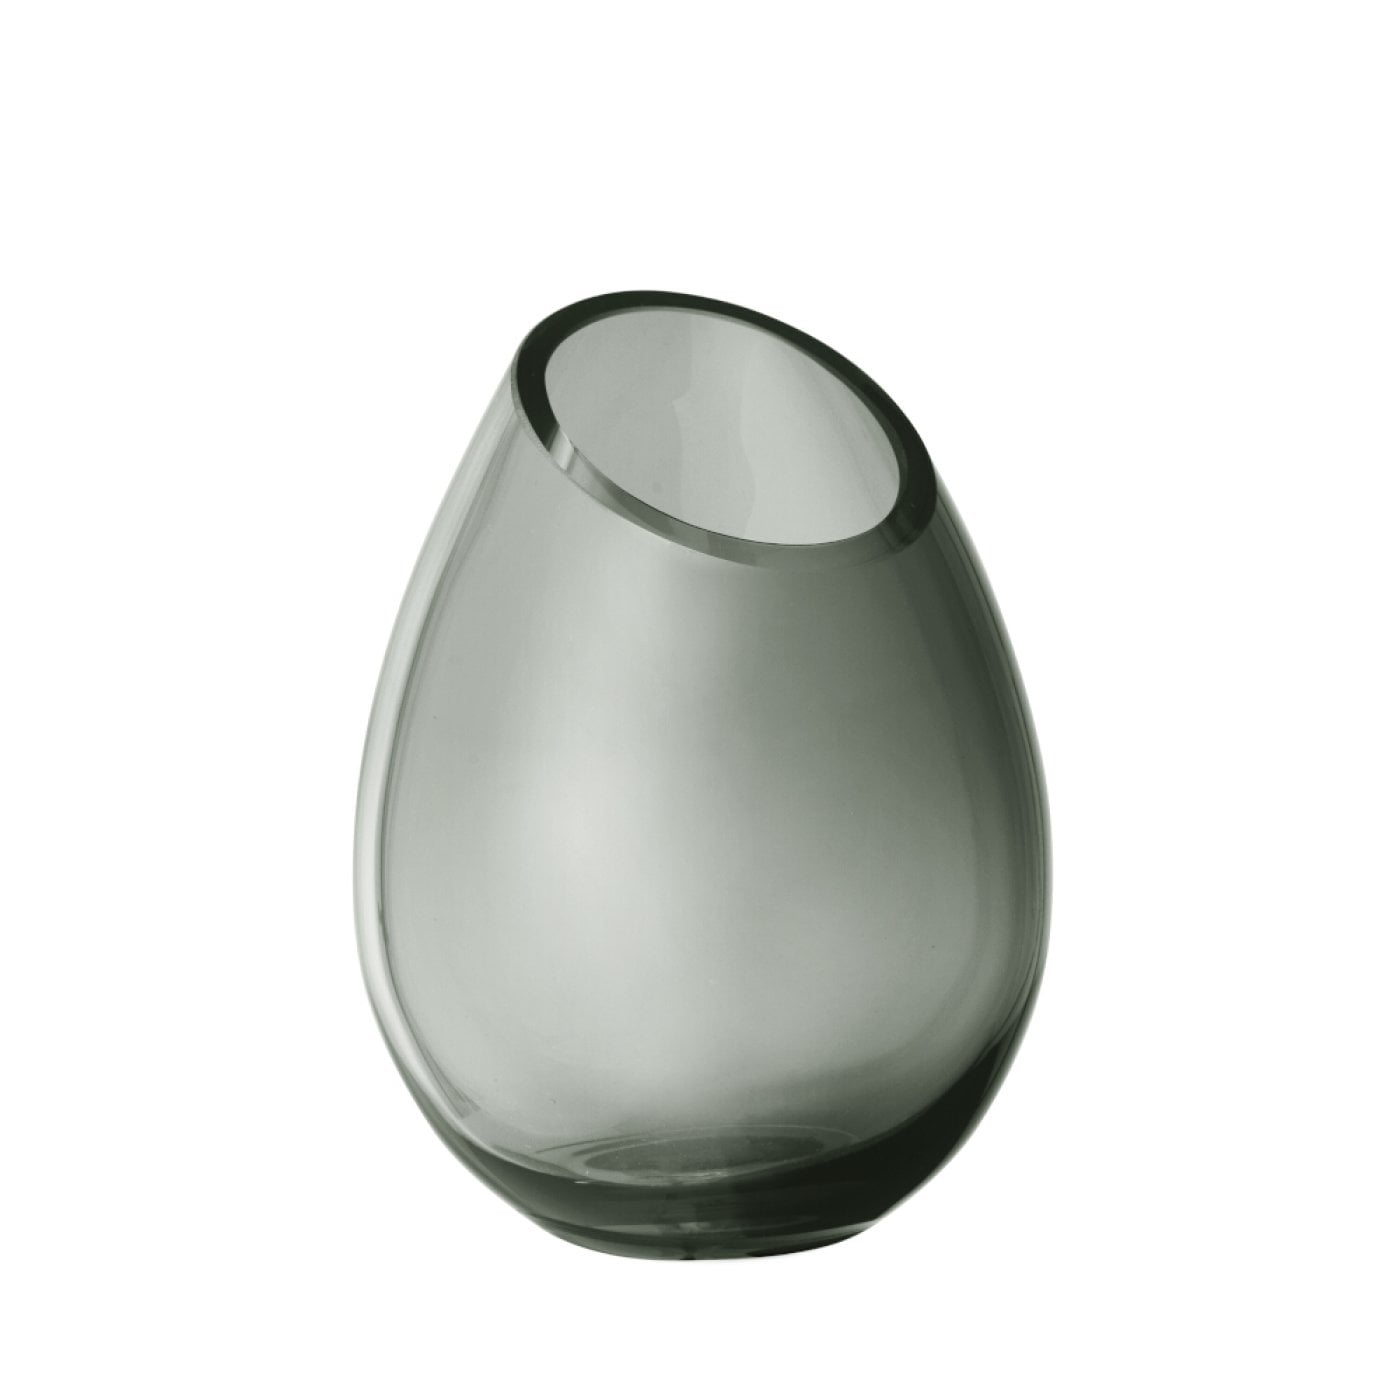 DROP Vase Small smoke 165 mm /  6.5in H x 4.9in